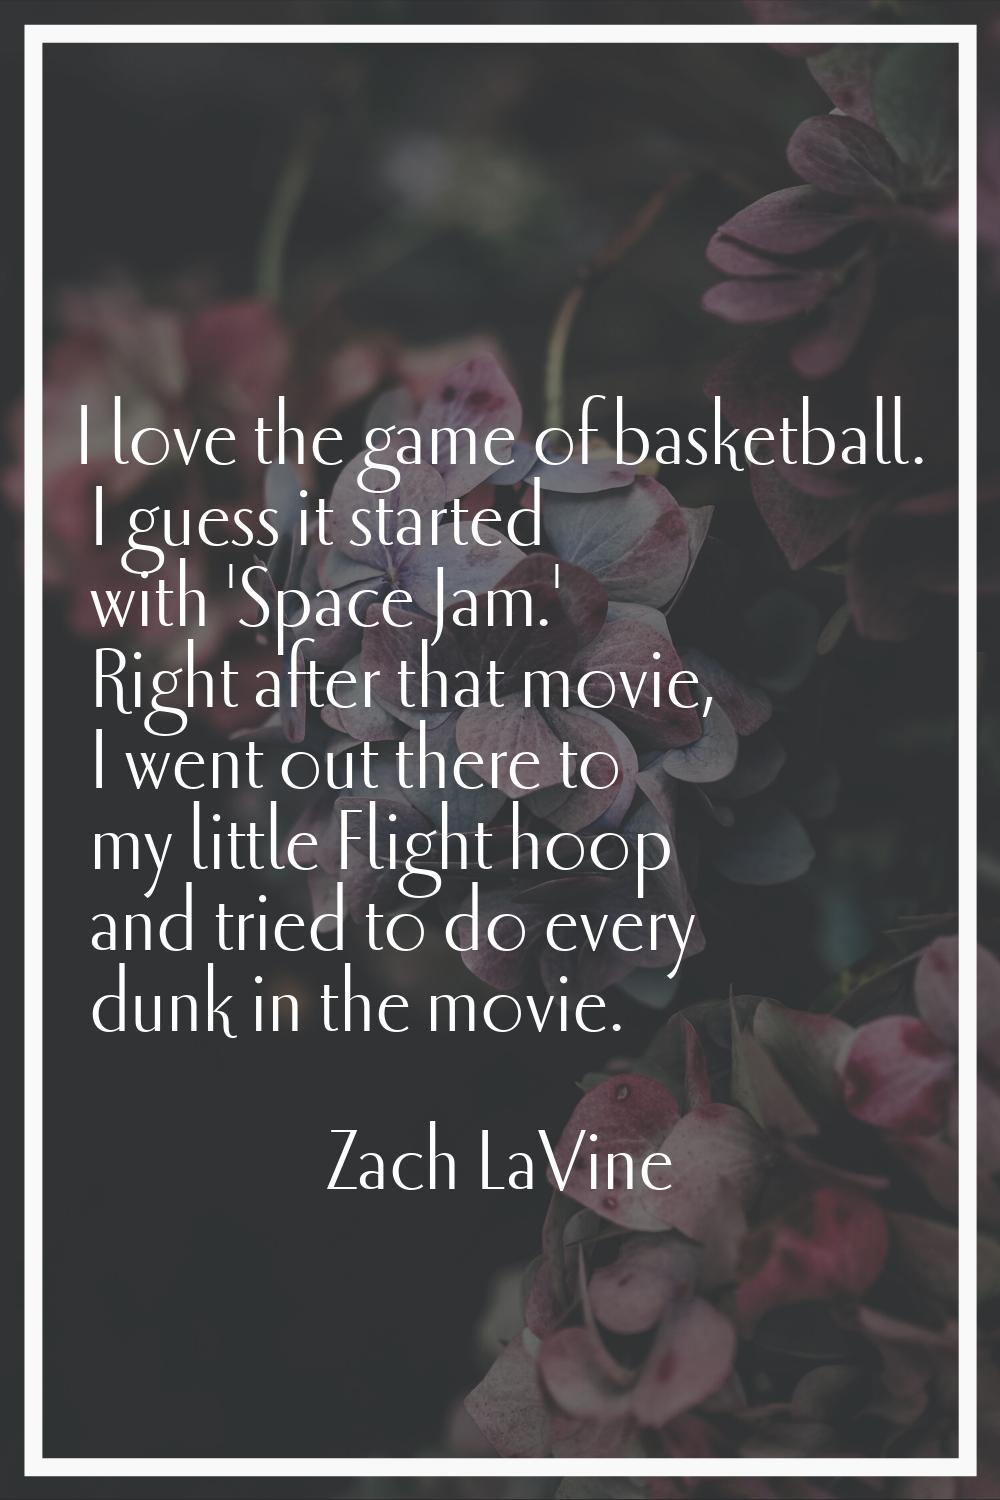 I love the game of basketball. I guess it started with 'Space Jam.' Right after that movie, I went 